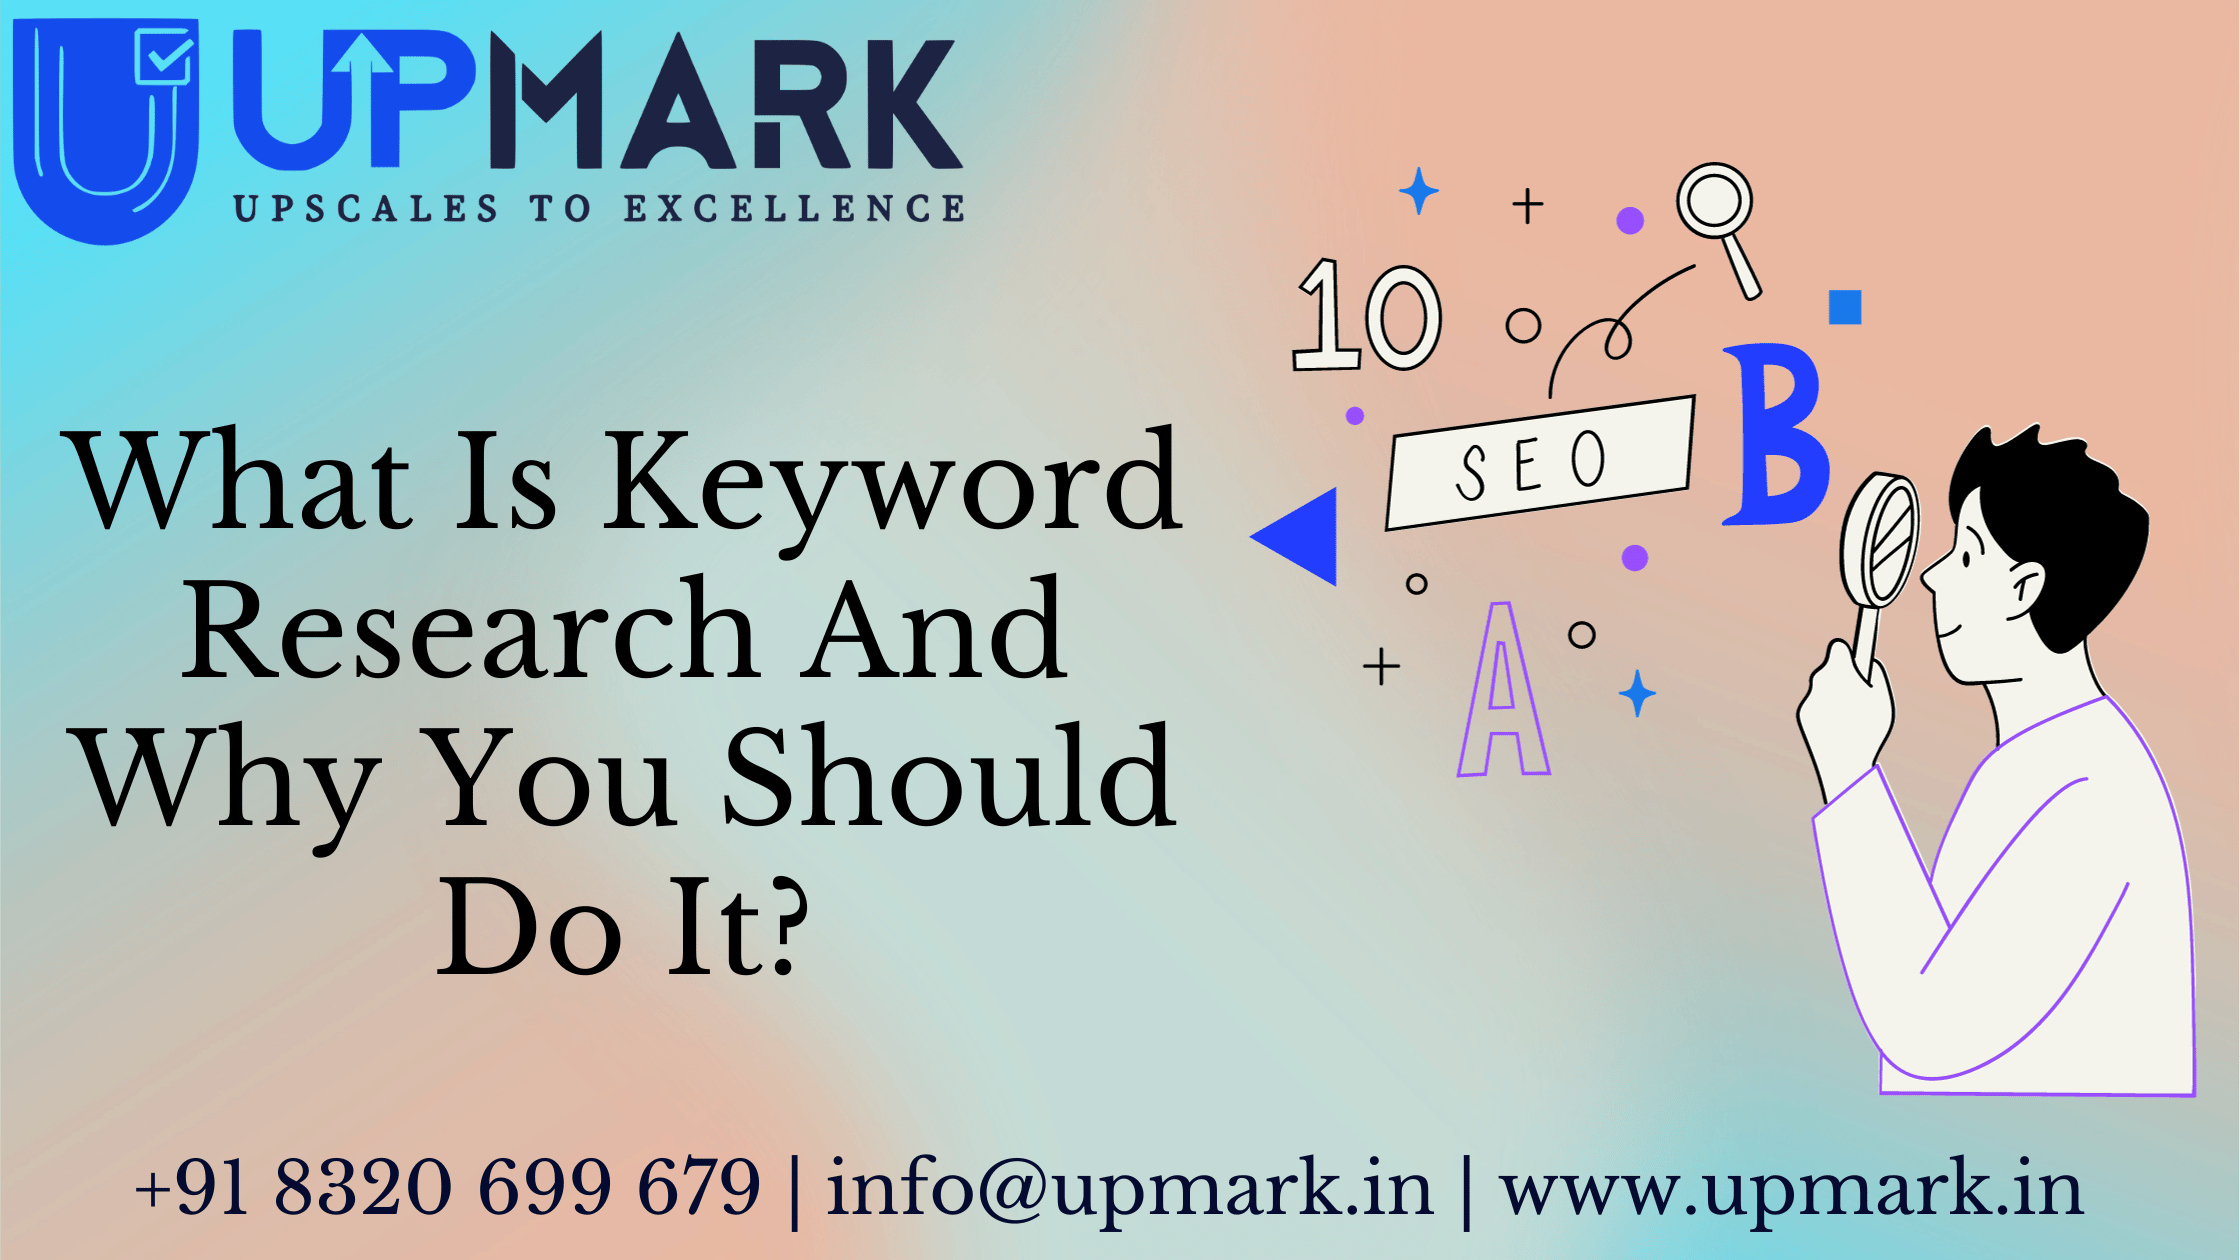 What Is Keyword Research And Why You Should Do It?